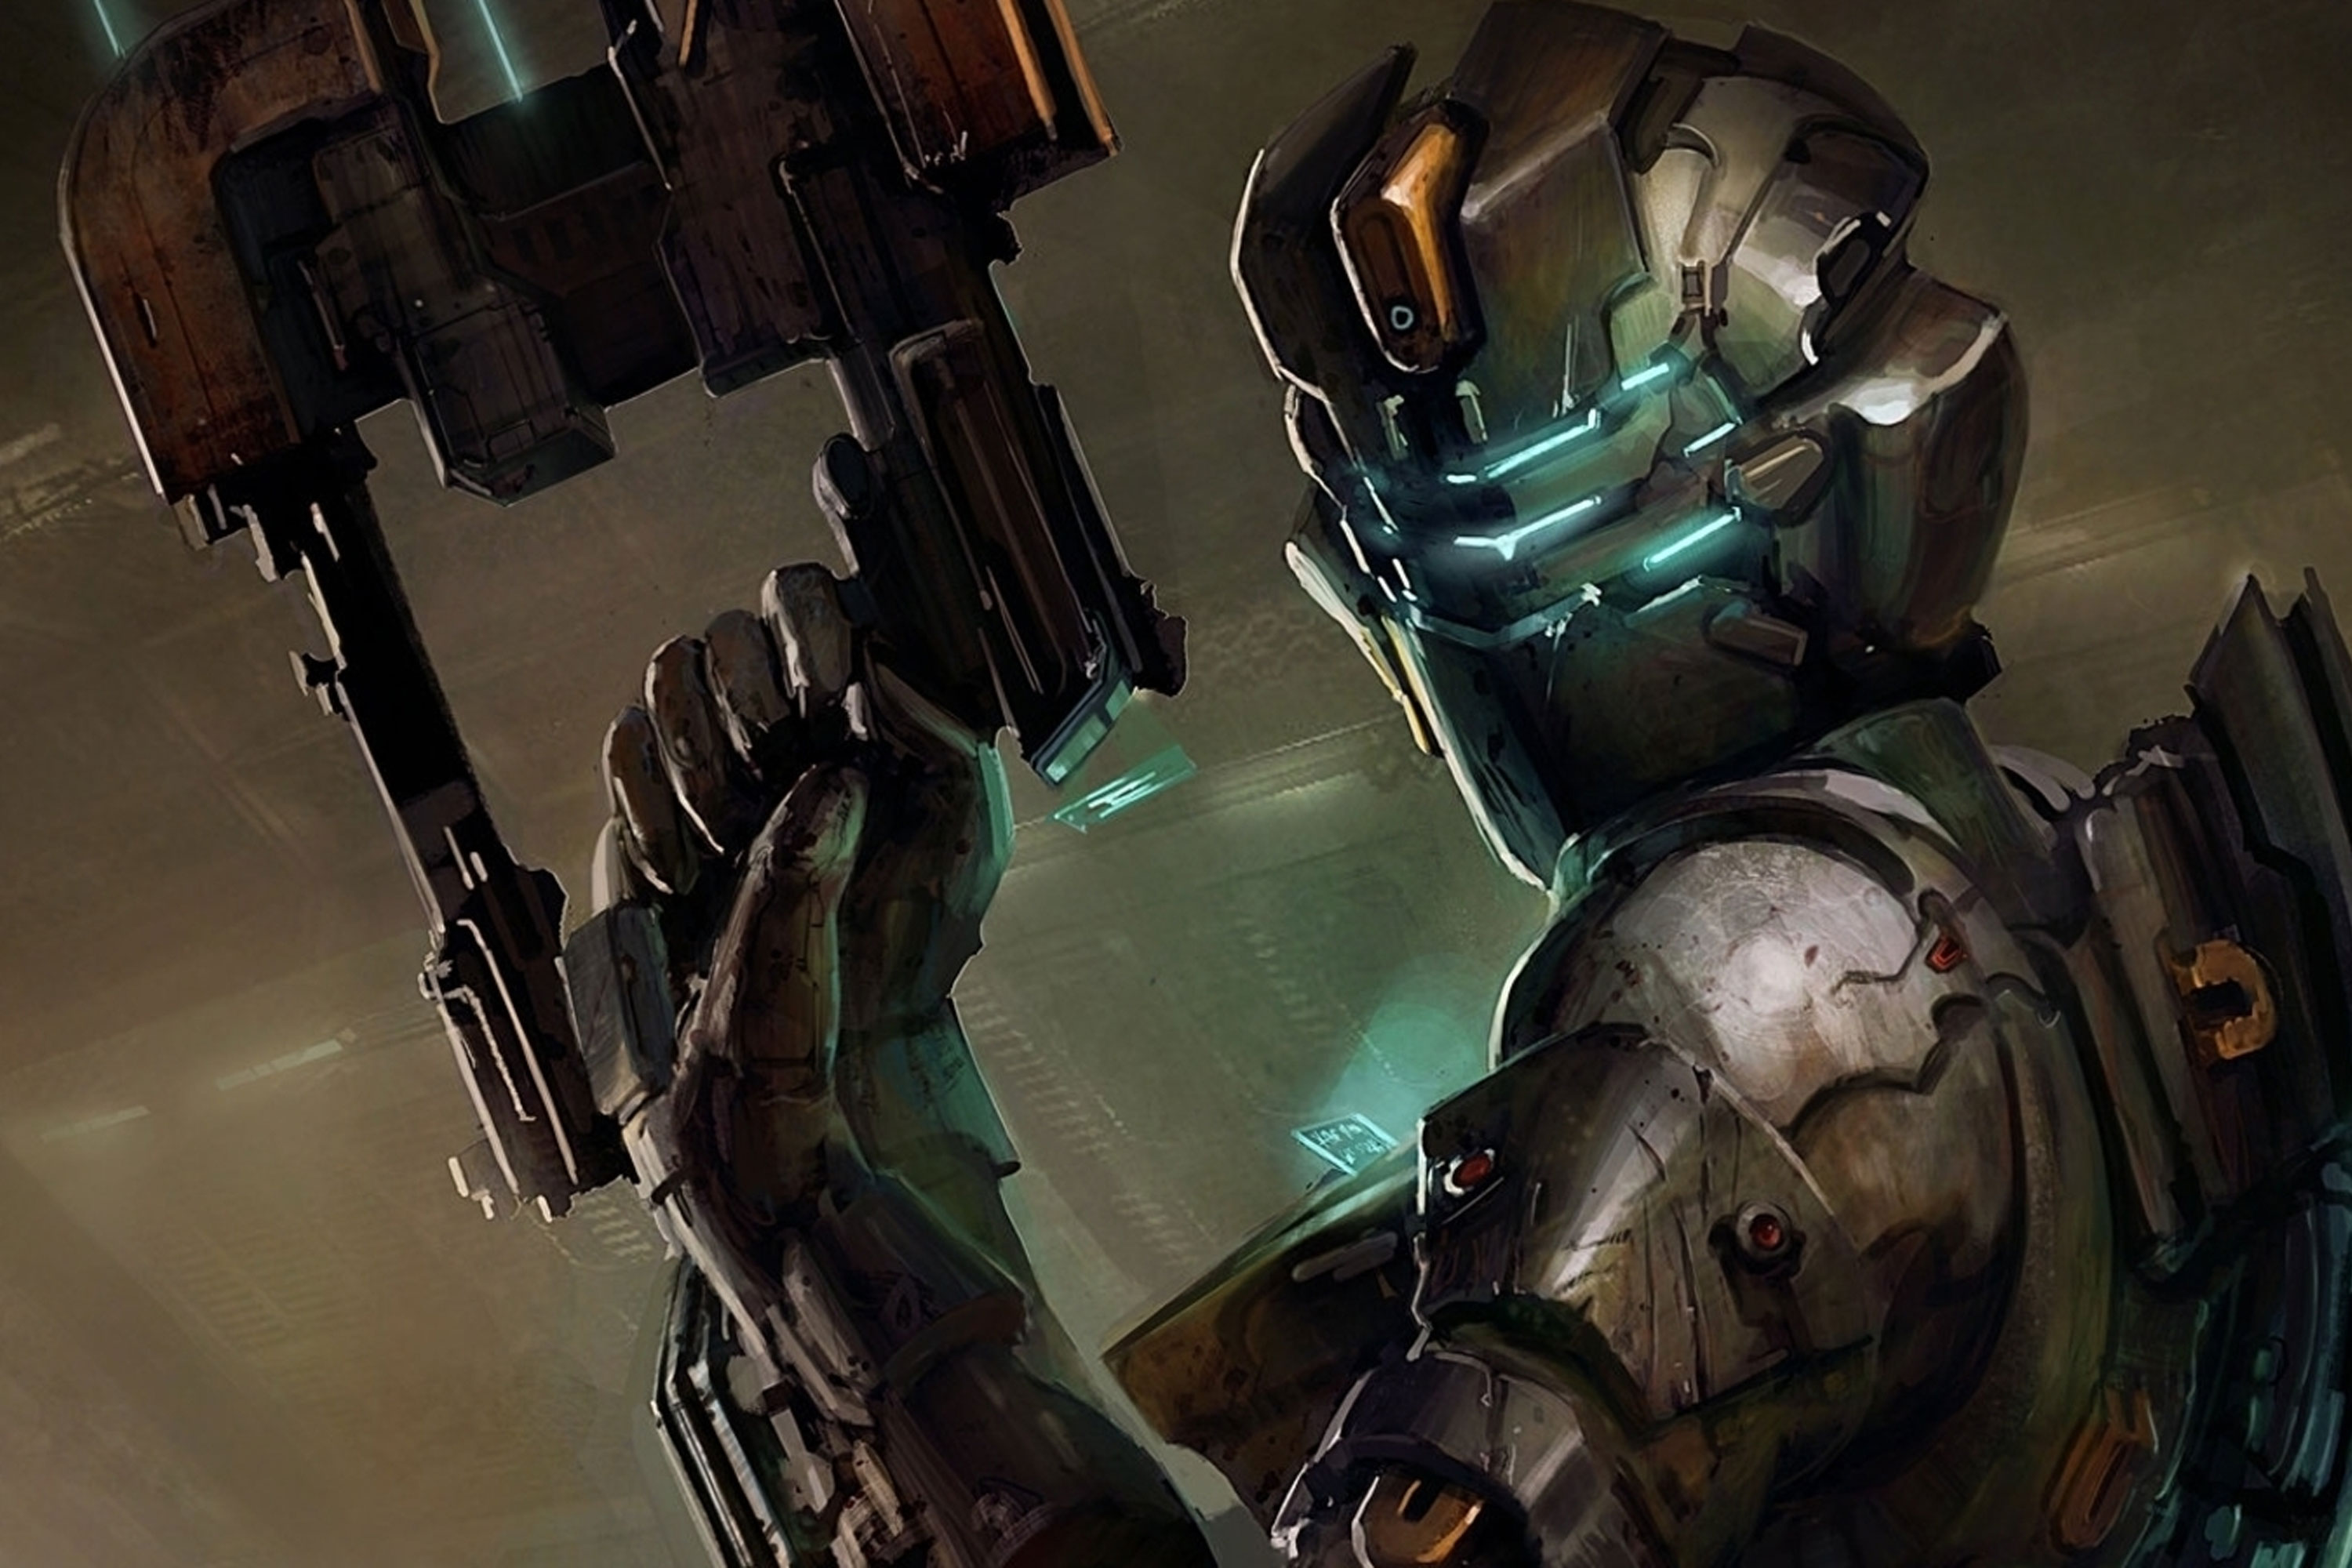 A promotional image from Dead Space 2 of Isaac Clarke holding a plasma cutter.